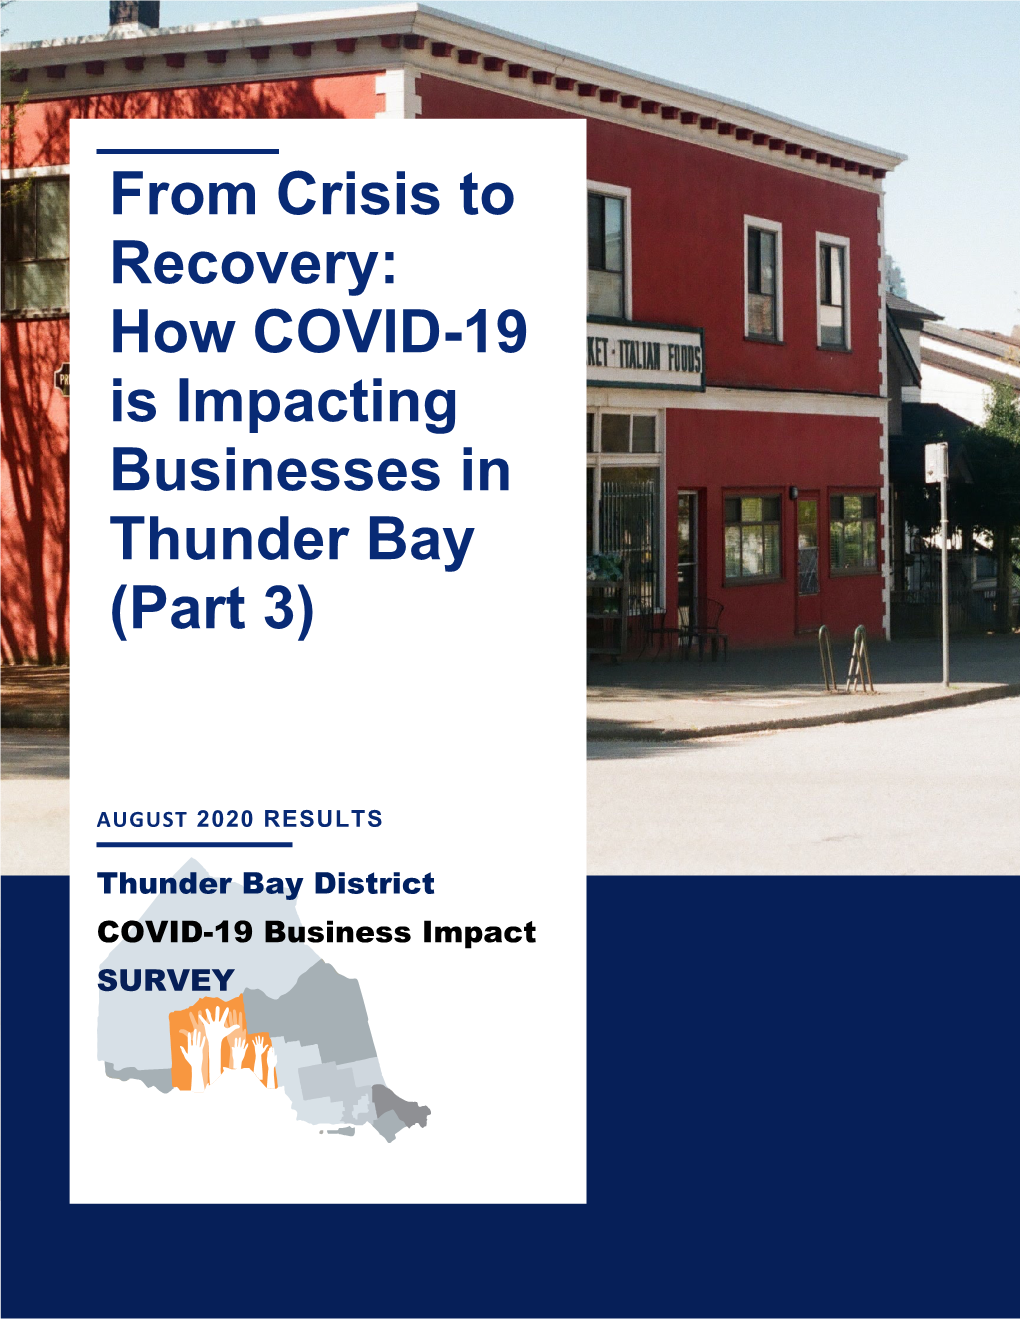 How COVID-19 Is Impacting Businesses in Thunder Bay (Part 3)